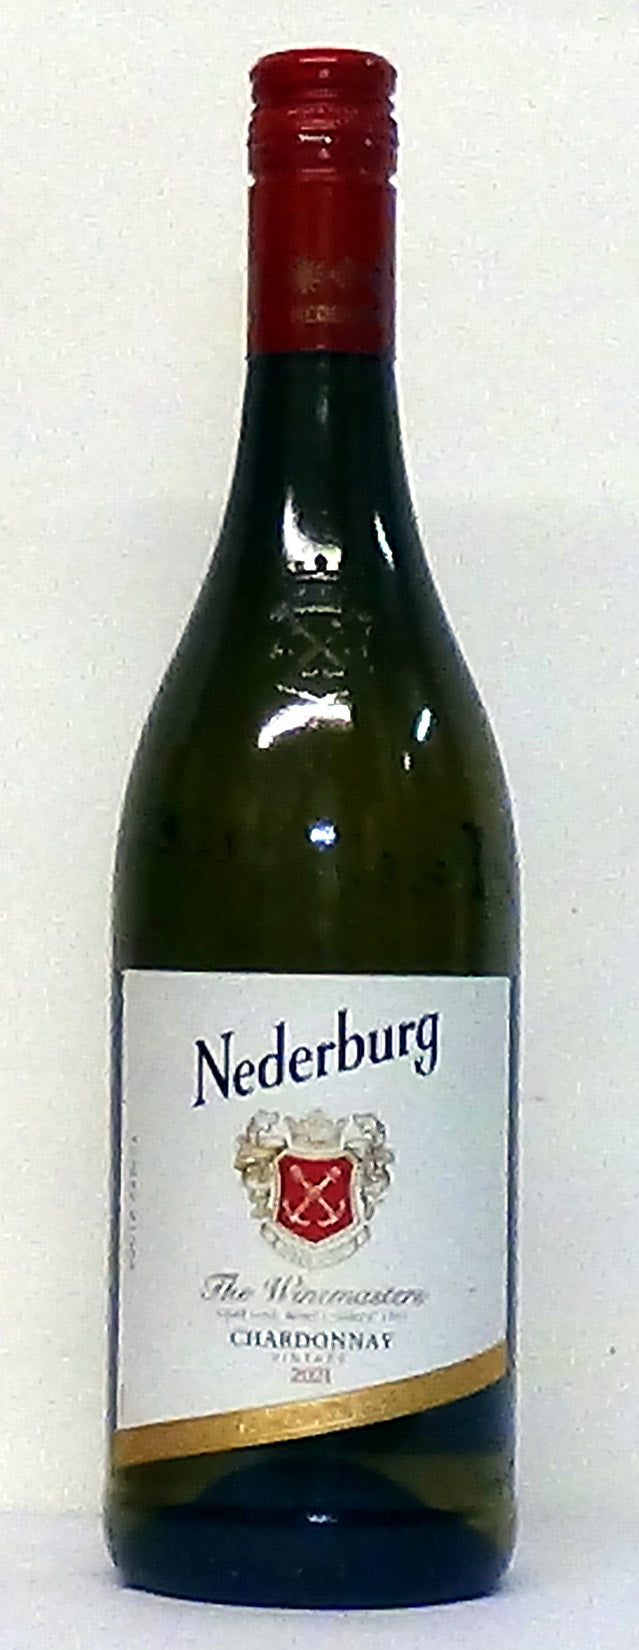 2021 Nederburg The Winemasters Chardonnay Western Cape South Africa